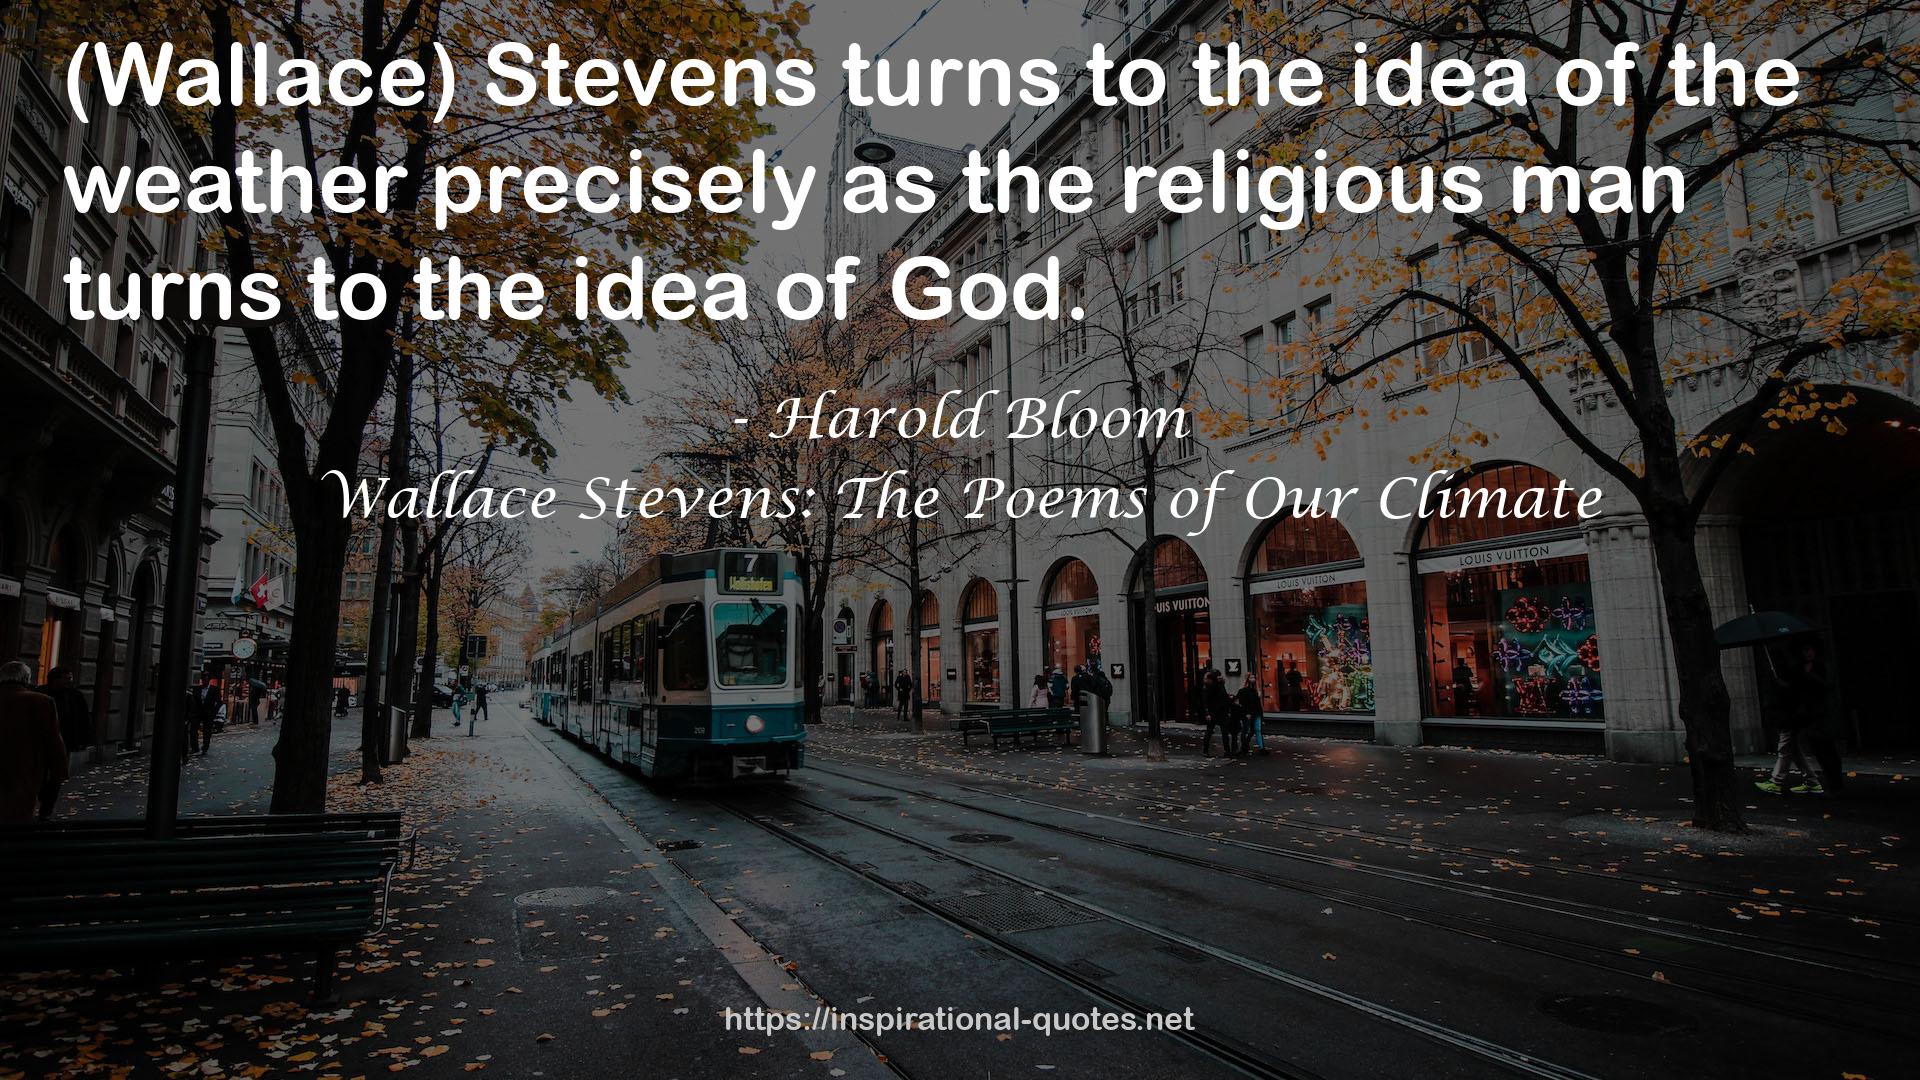 Wallace Stevens: The Poems of Our Climate QUOTES